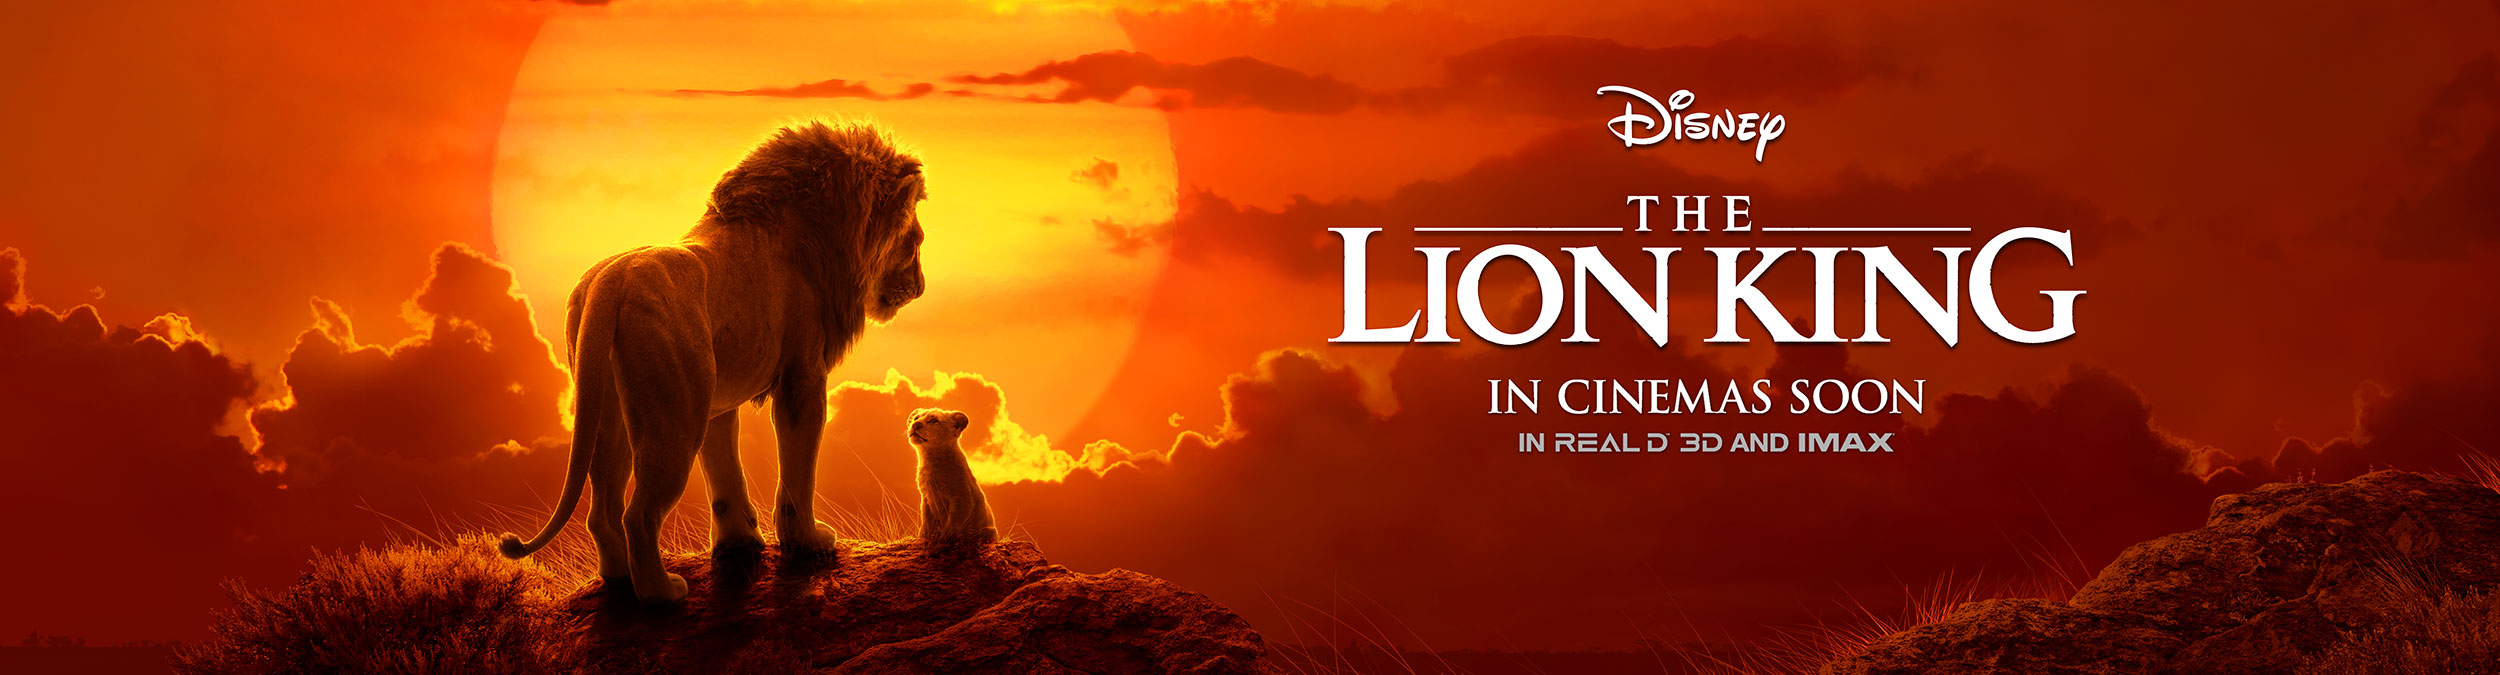 The Lion King | Premiere Wall Finishing & Illustration